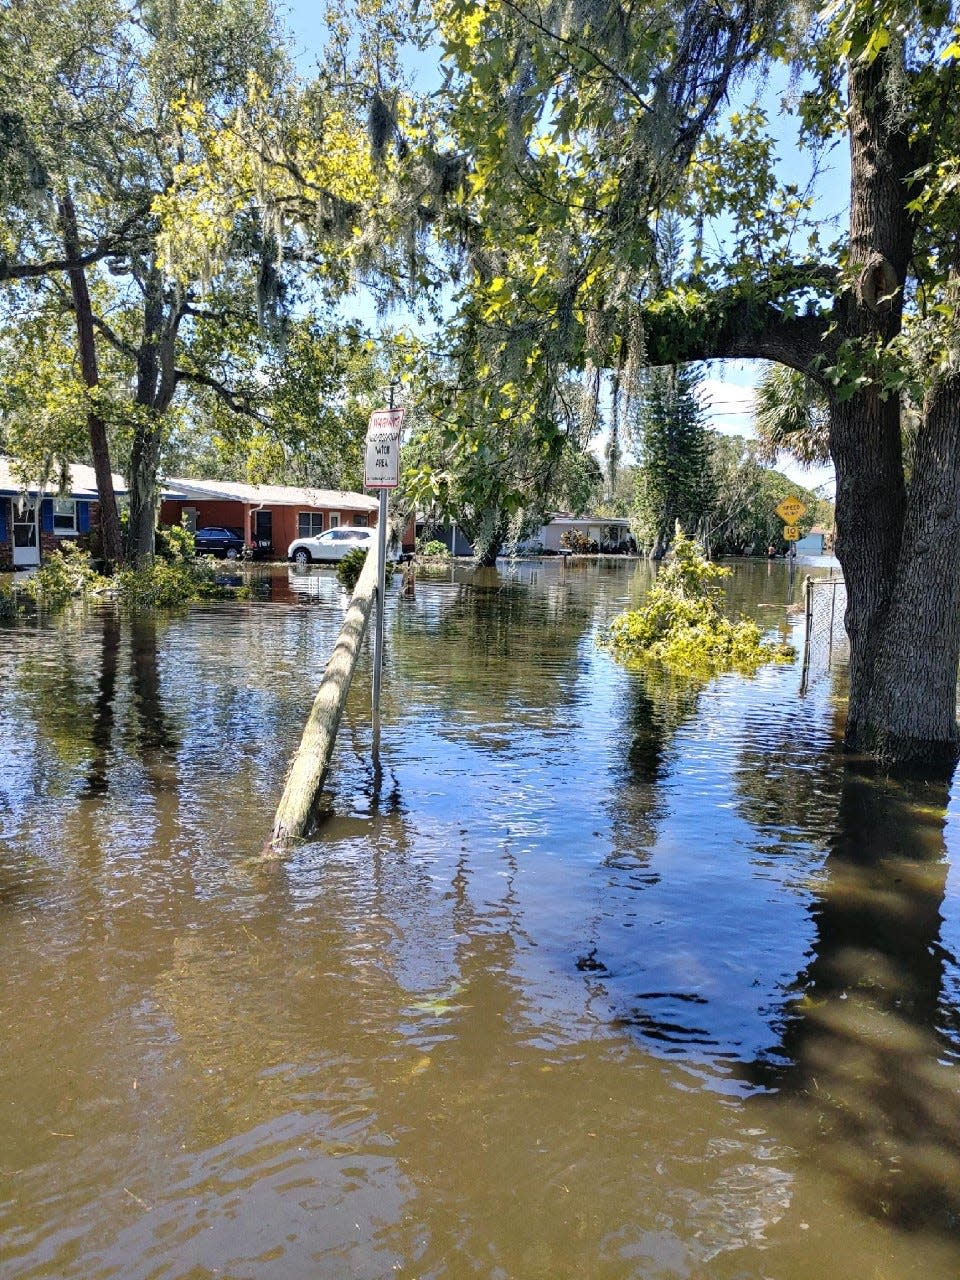 Daytona Beach's Midtown neighborhood was inundated with floodwater that rose as high as five feet in some areas of the community between Nova Road and Ridgewood Avenue. Pictured is Lockhart Street off of Kottle Circle as it looked at the end of September.